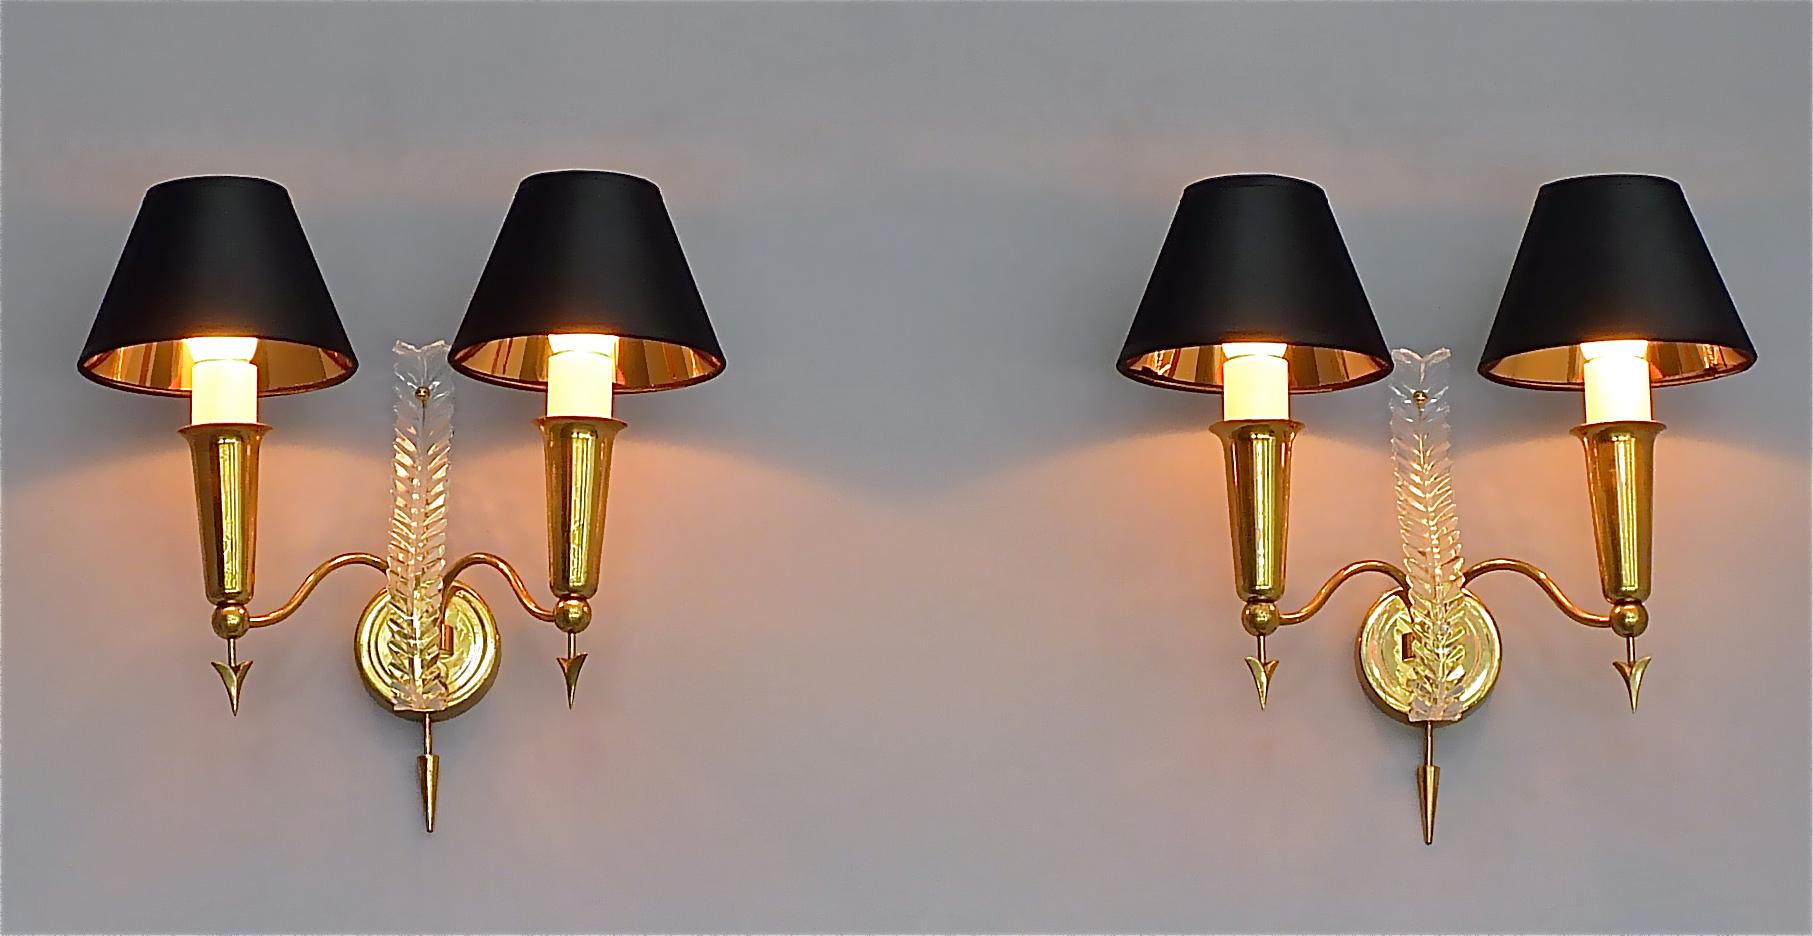 Very elegant pair of Maison Arlus midcentury sconces, Maison Jansen style, France, circa 1950s. The beautiful two-arm sconces with arrow motif inspired by Gio Pontis candelabras for Christofle are made of brass with a nice and warm patina, a